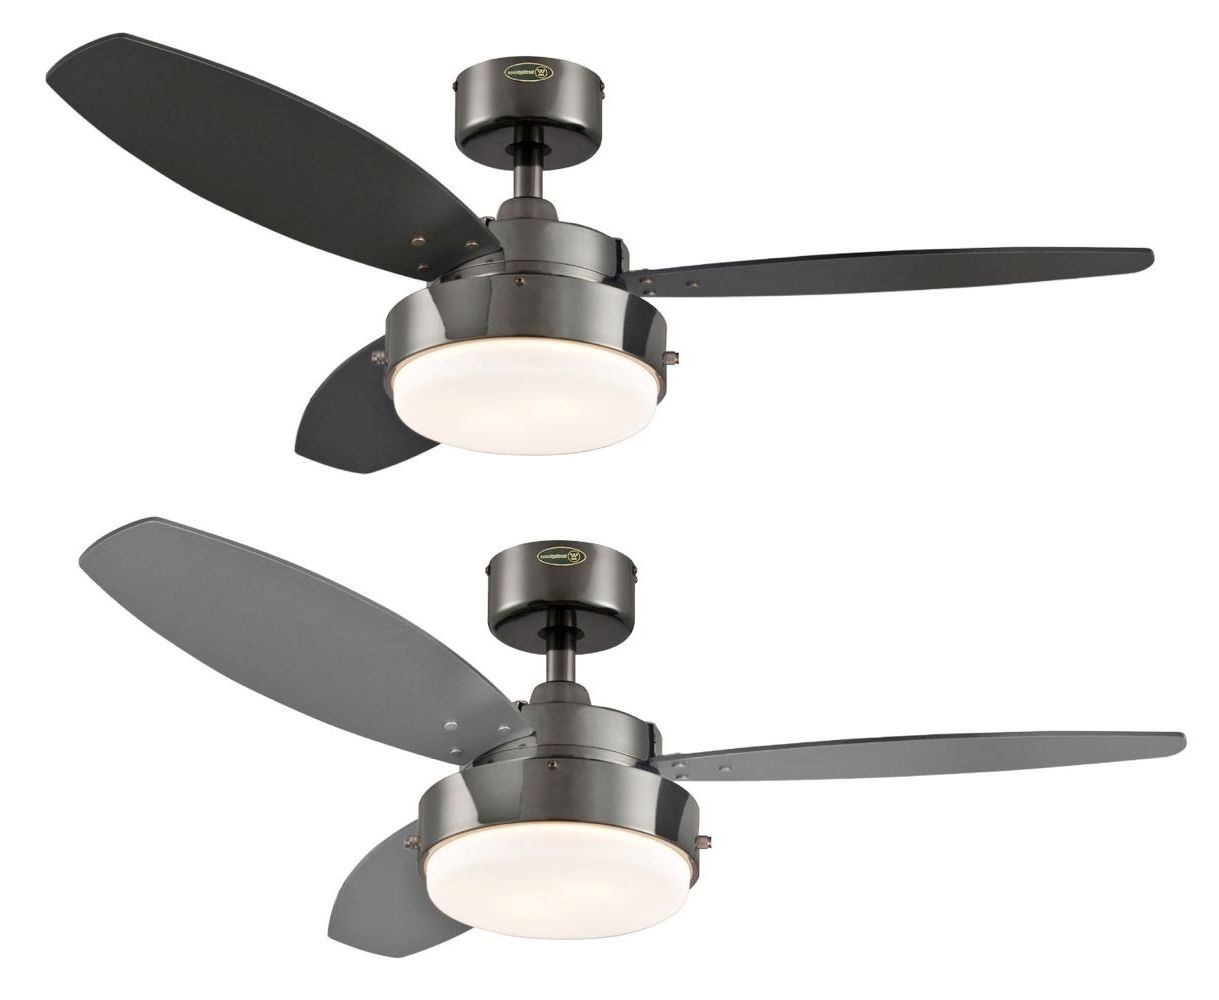 Preferred 36 Outdoor Ceiling Fan – Photos House Interior And Fan With Regard To 36 Inch Outdoor Ceiling Fans With Lights (View 7 of 20)